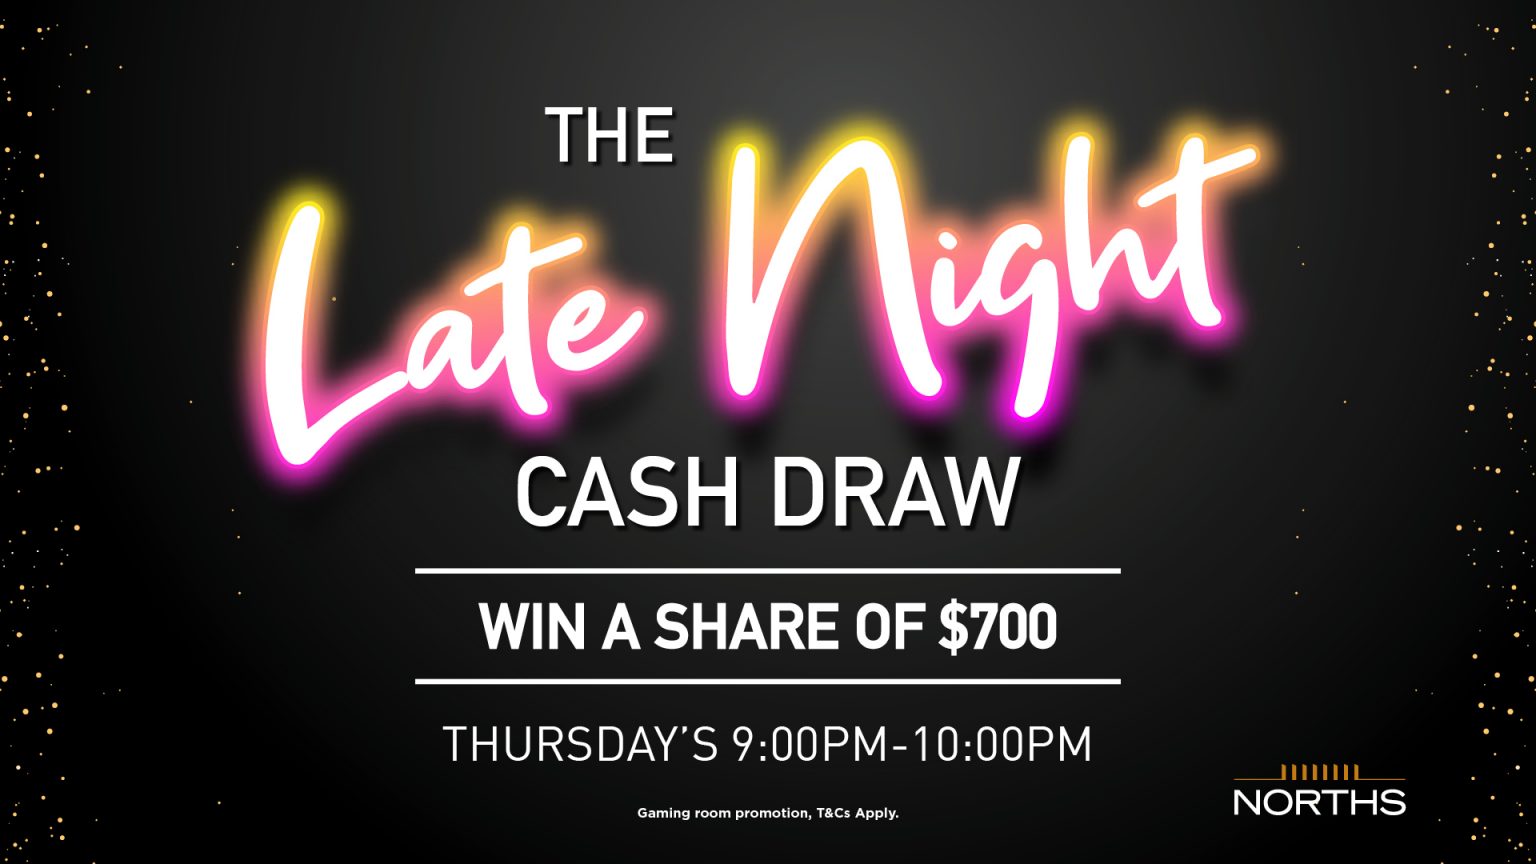 The Late Night Cash Draw